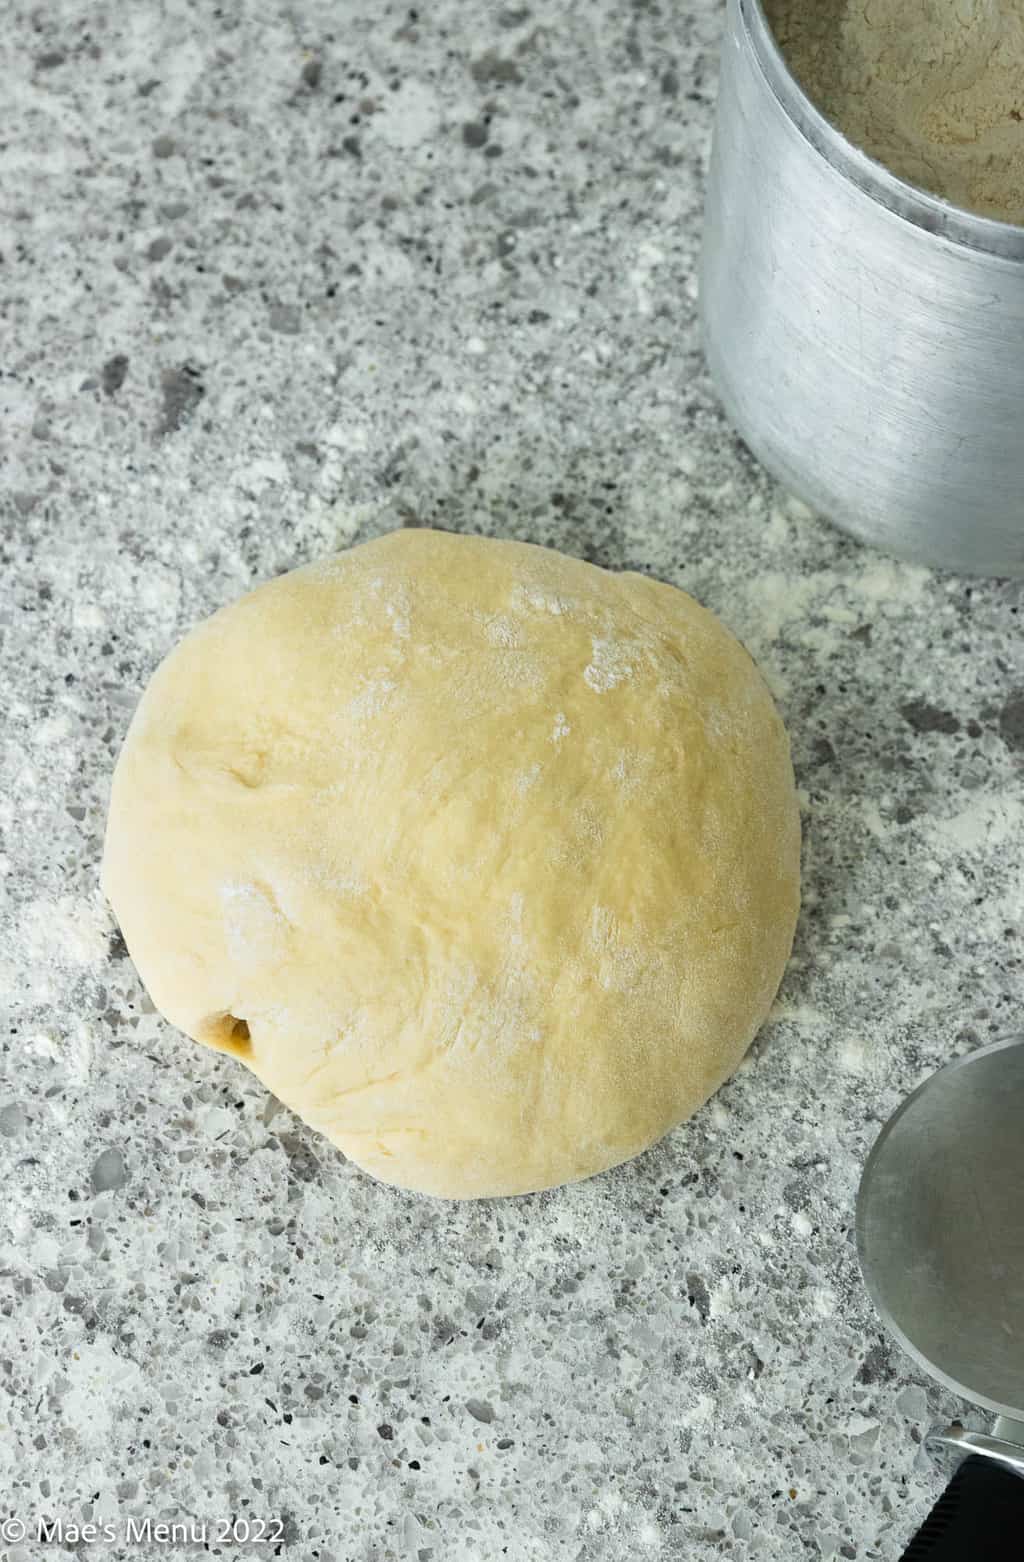 An overhead shot of a ball of bread dough on the counter.